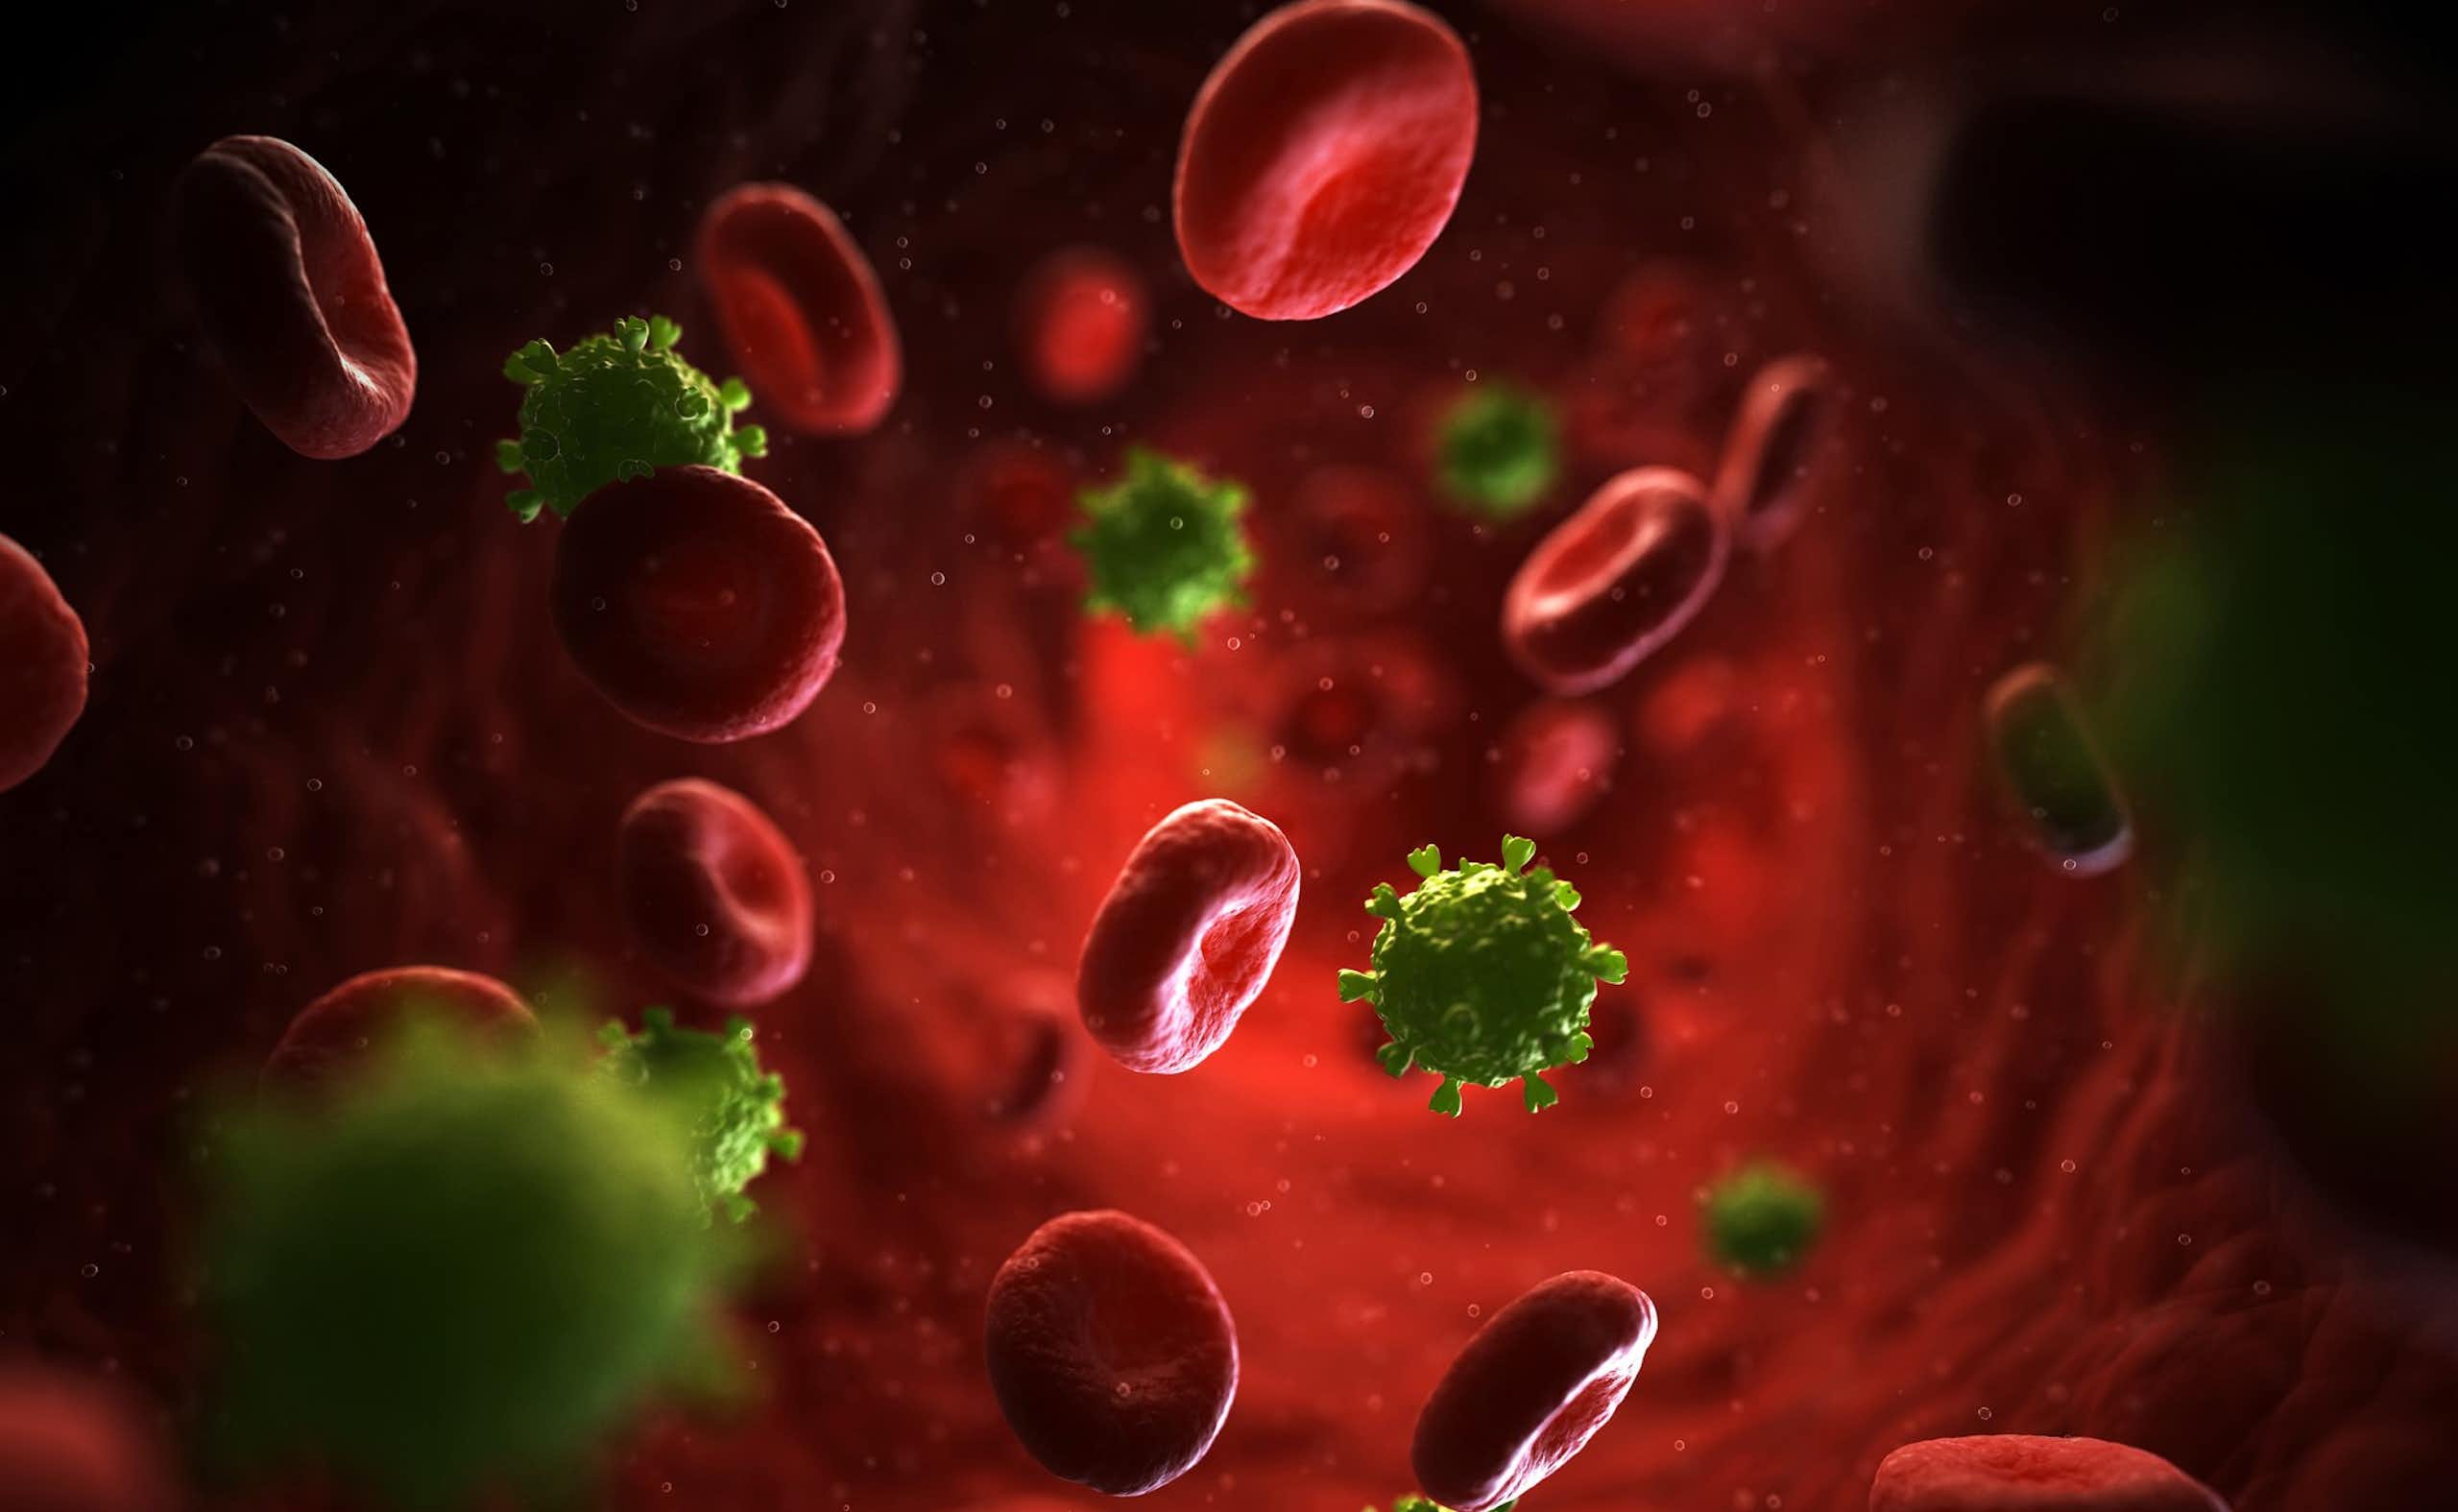 Computer artwork of HIV particles in the bloodstream